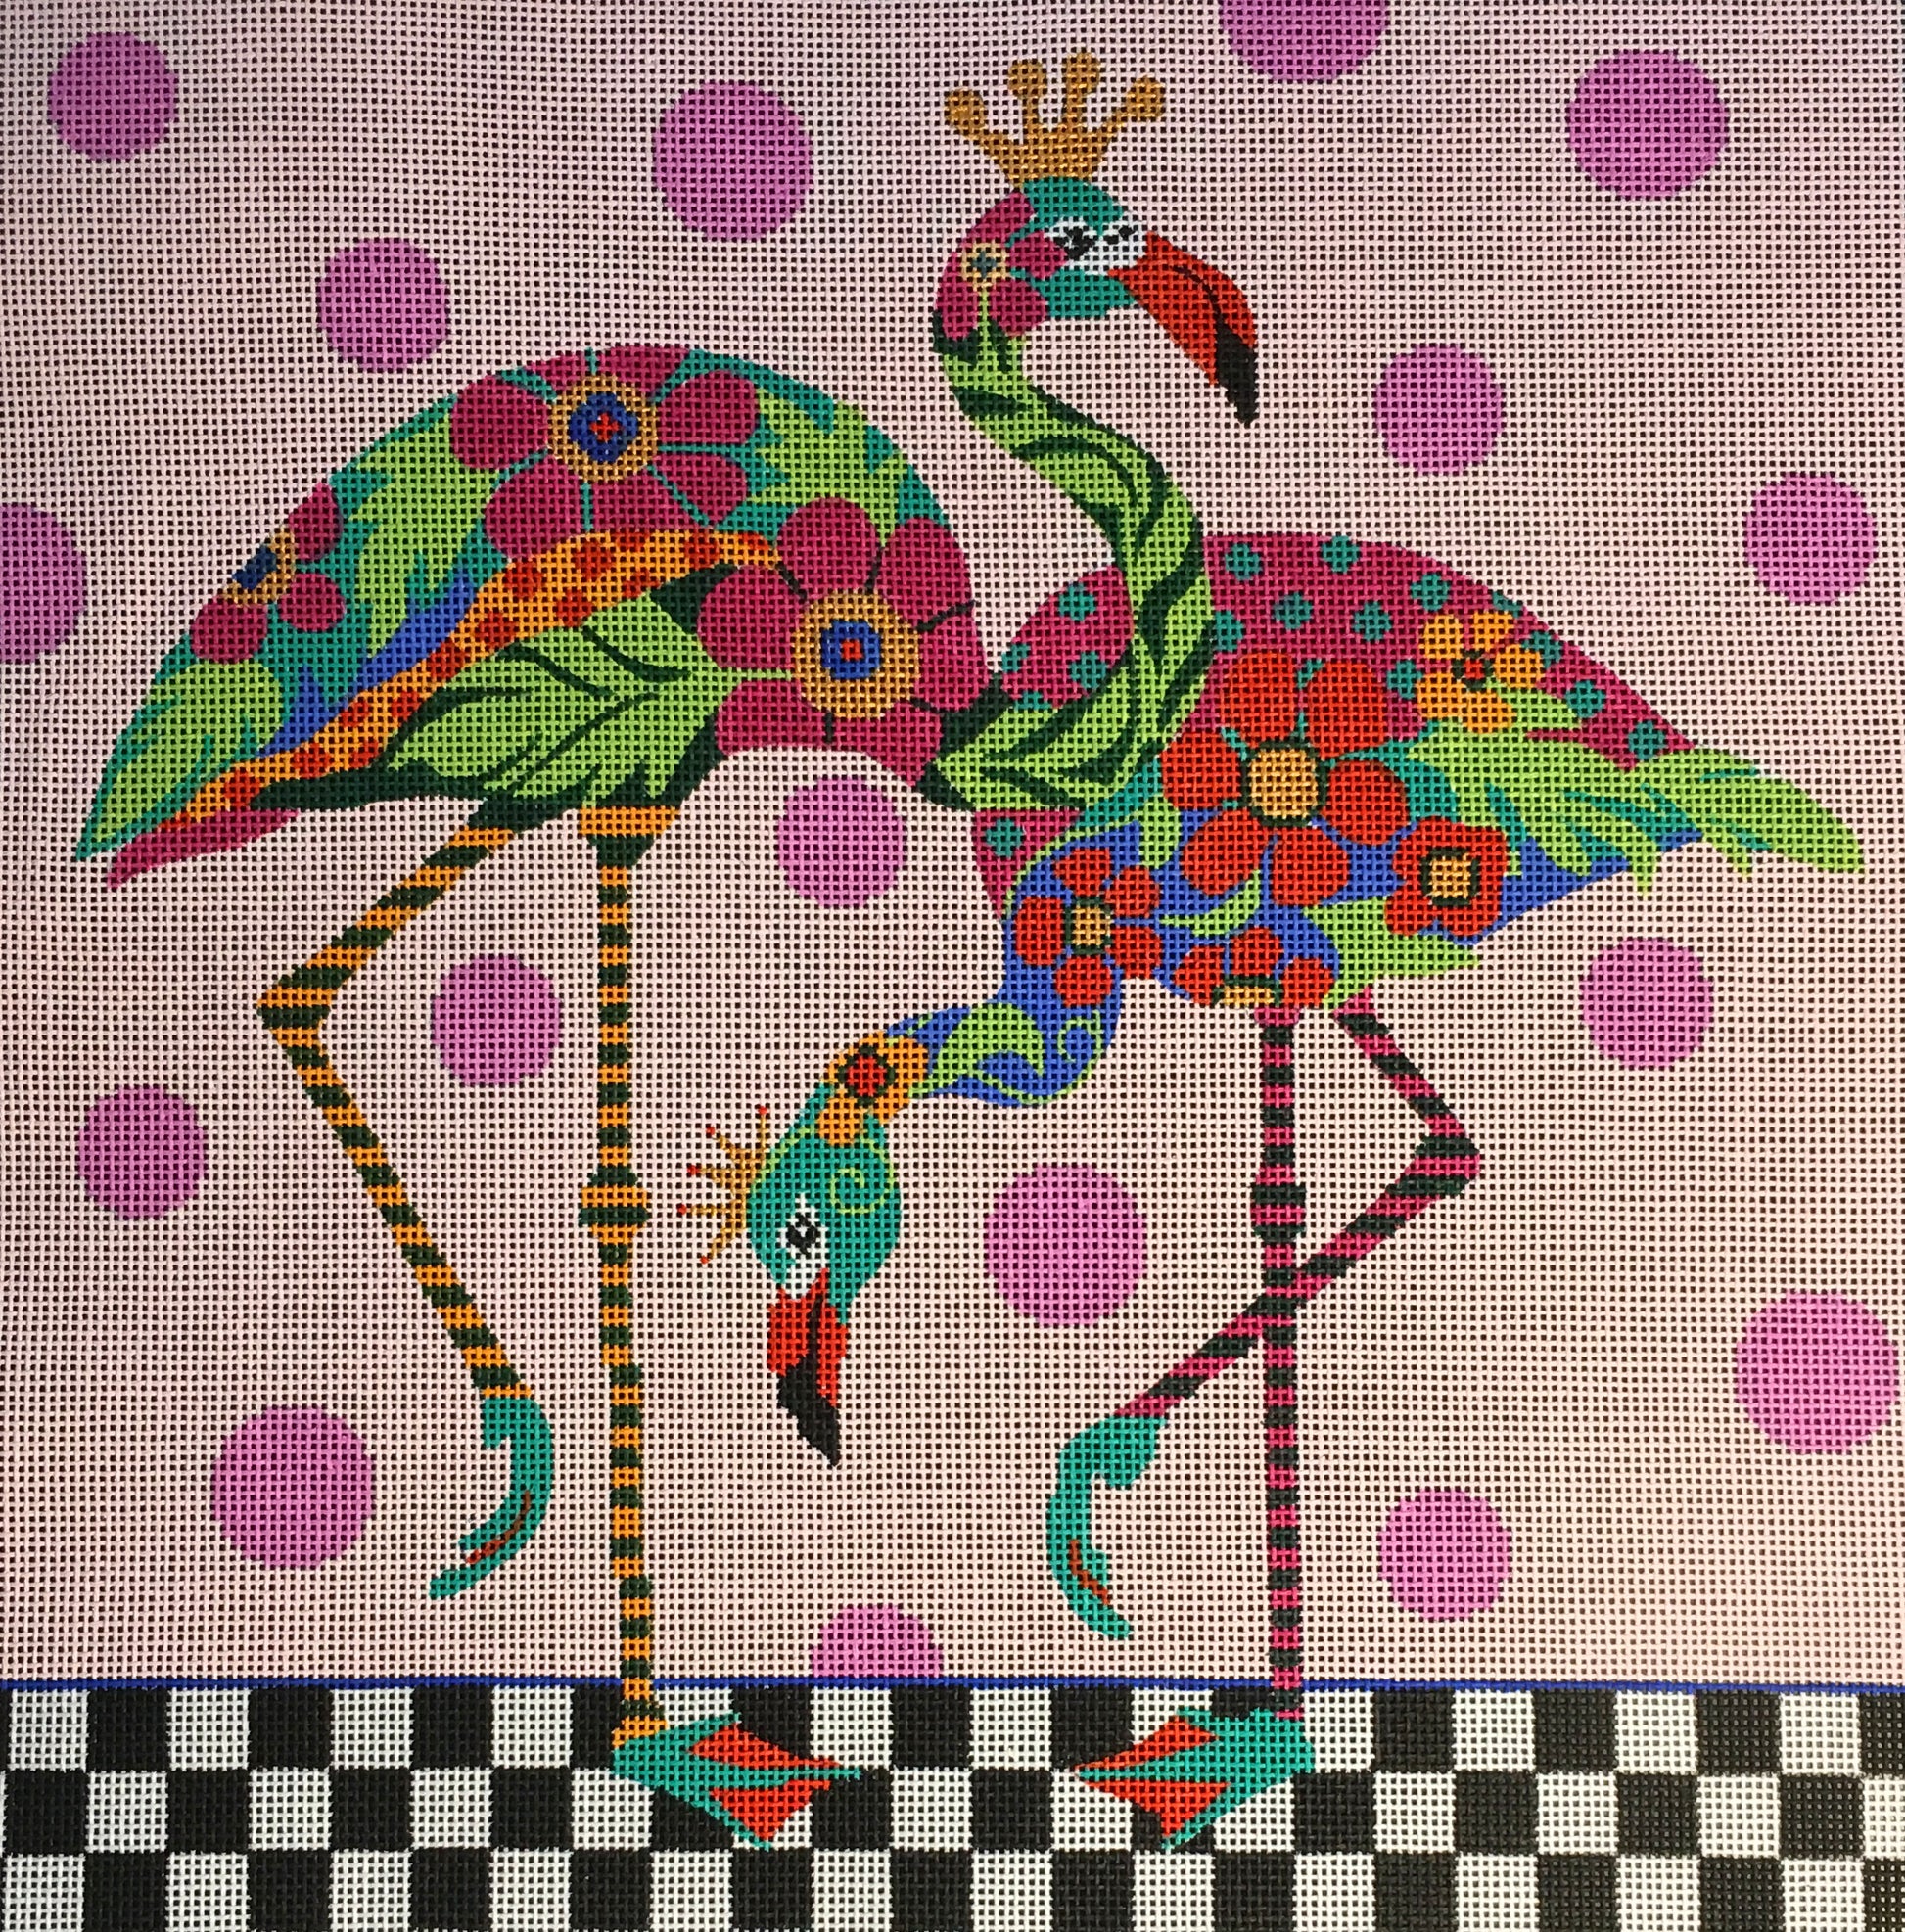 Amanda Lawford bright needlepoint canvas of two vibrantly patterned flamingos wearing crowns on polka dot background